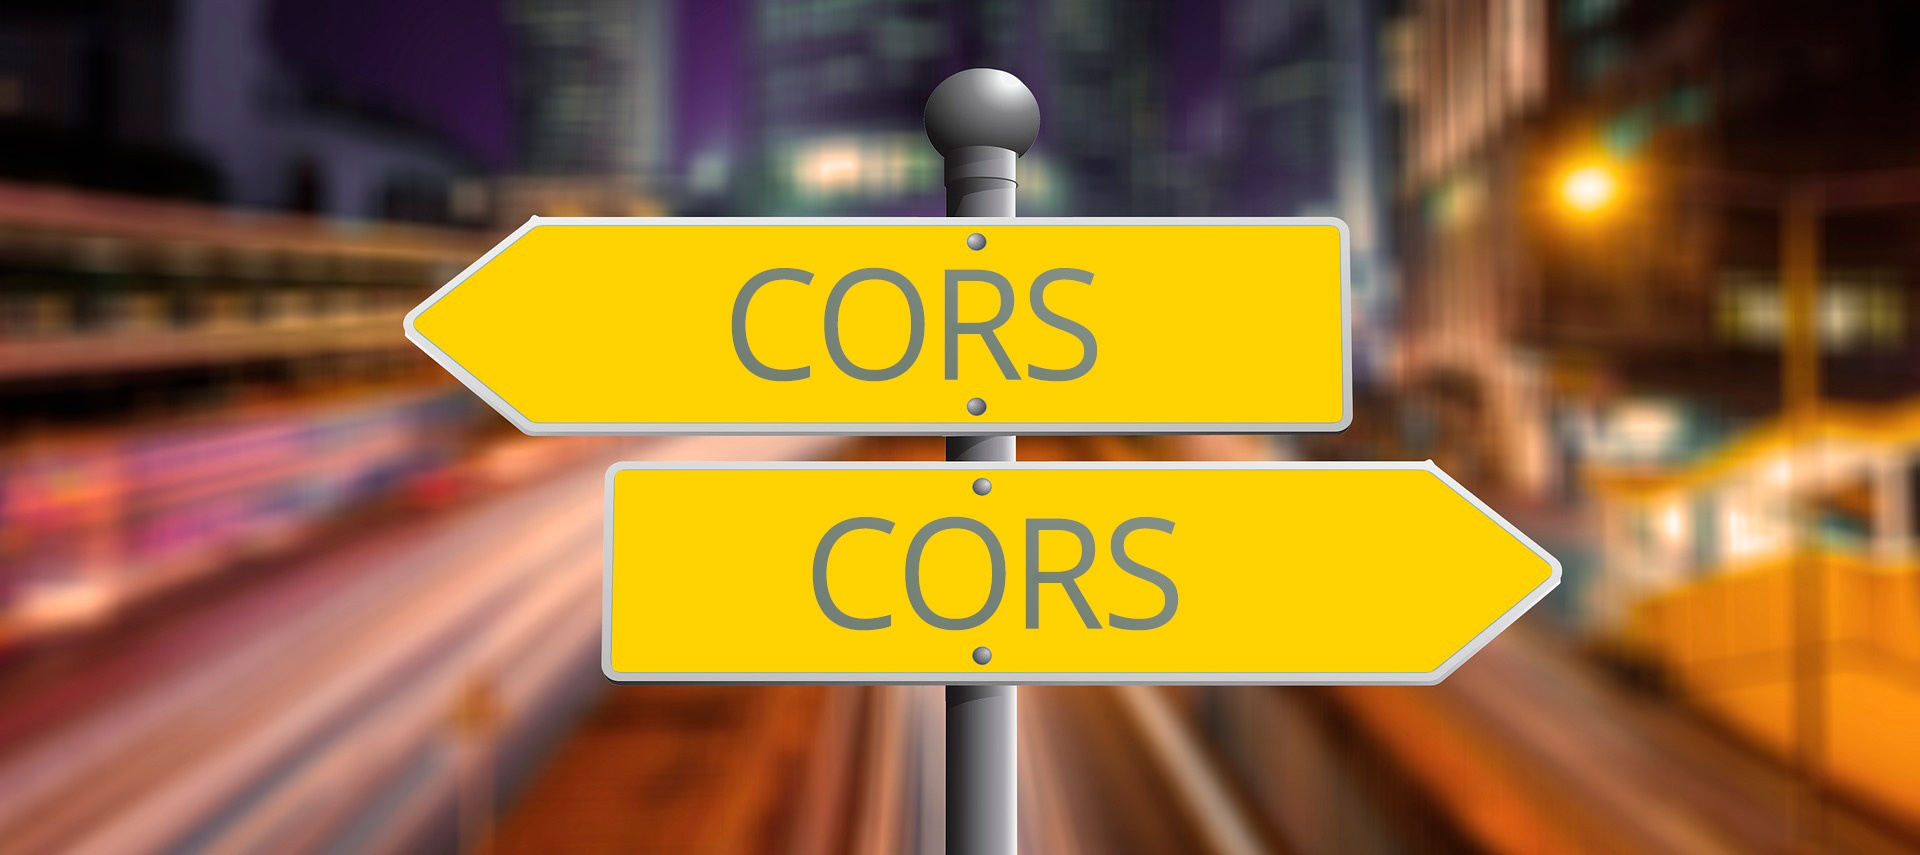 Find how to configure CORS with THEOplayer